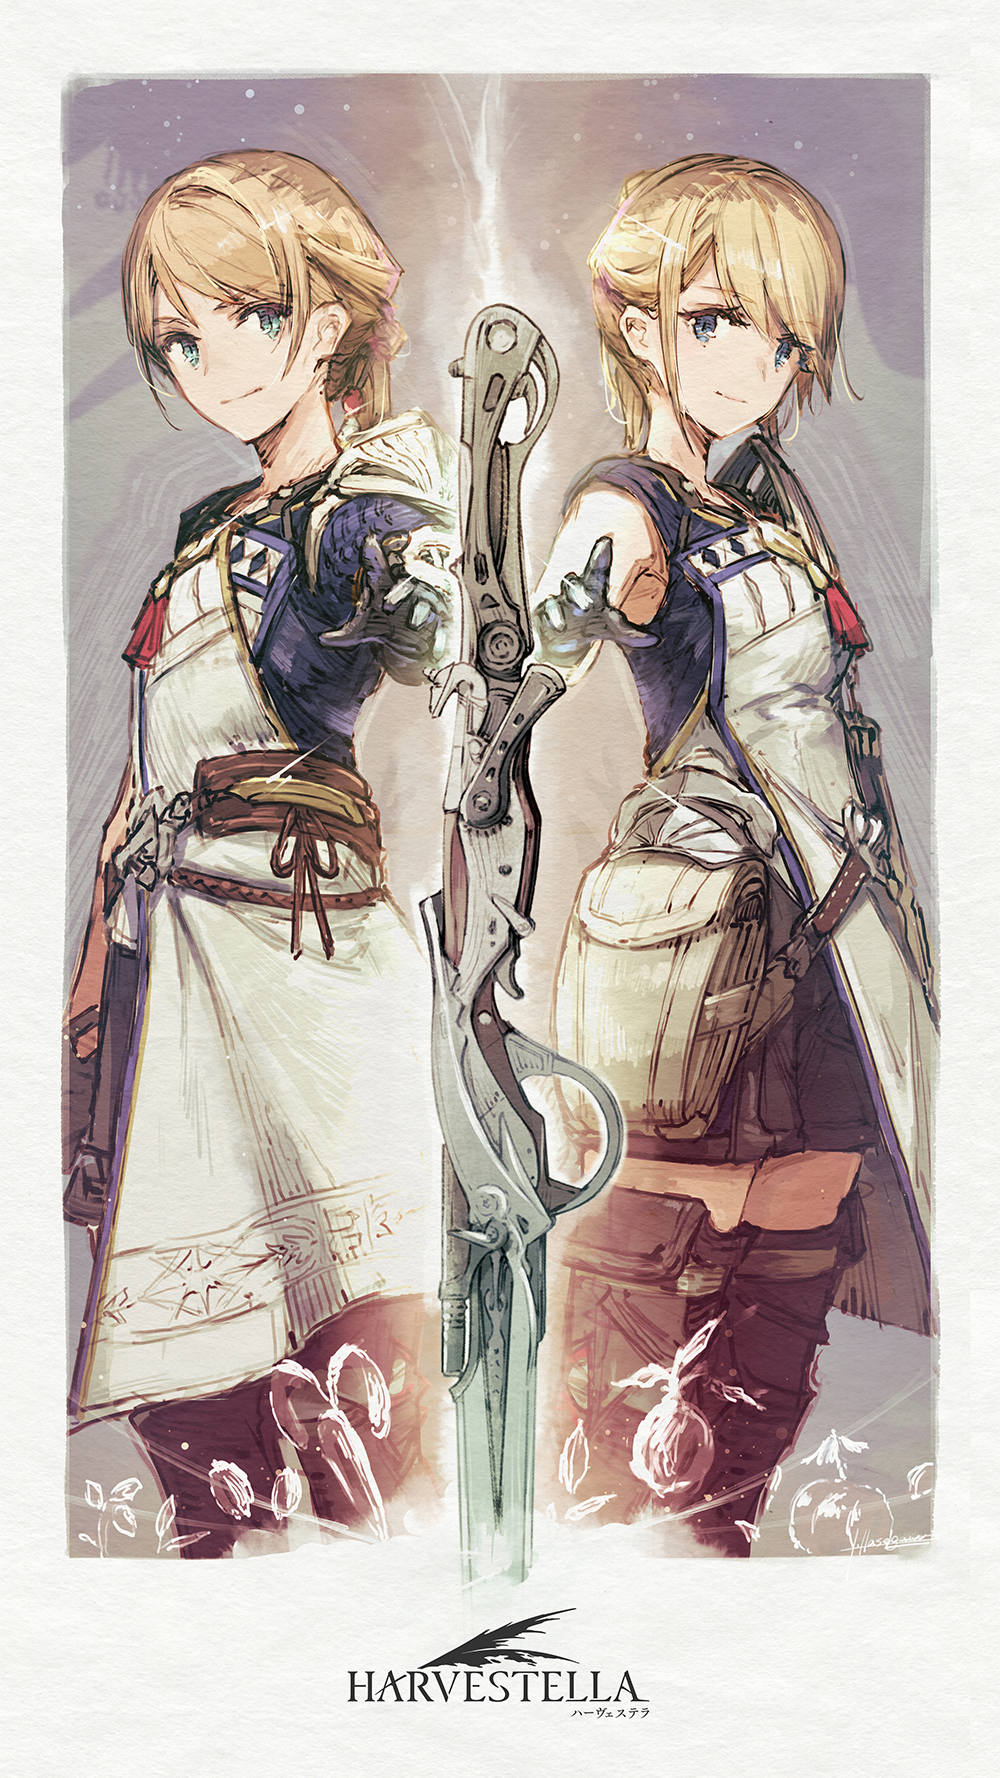 The Protagonist of Harvestella, 
    in either boy or girl mode. Both have white skin, long blond hair, blue eyes, a fantasy outfit in white and blue, and are reaching out for
    their weapon at the center of the image